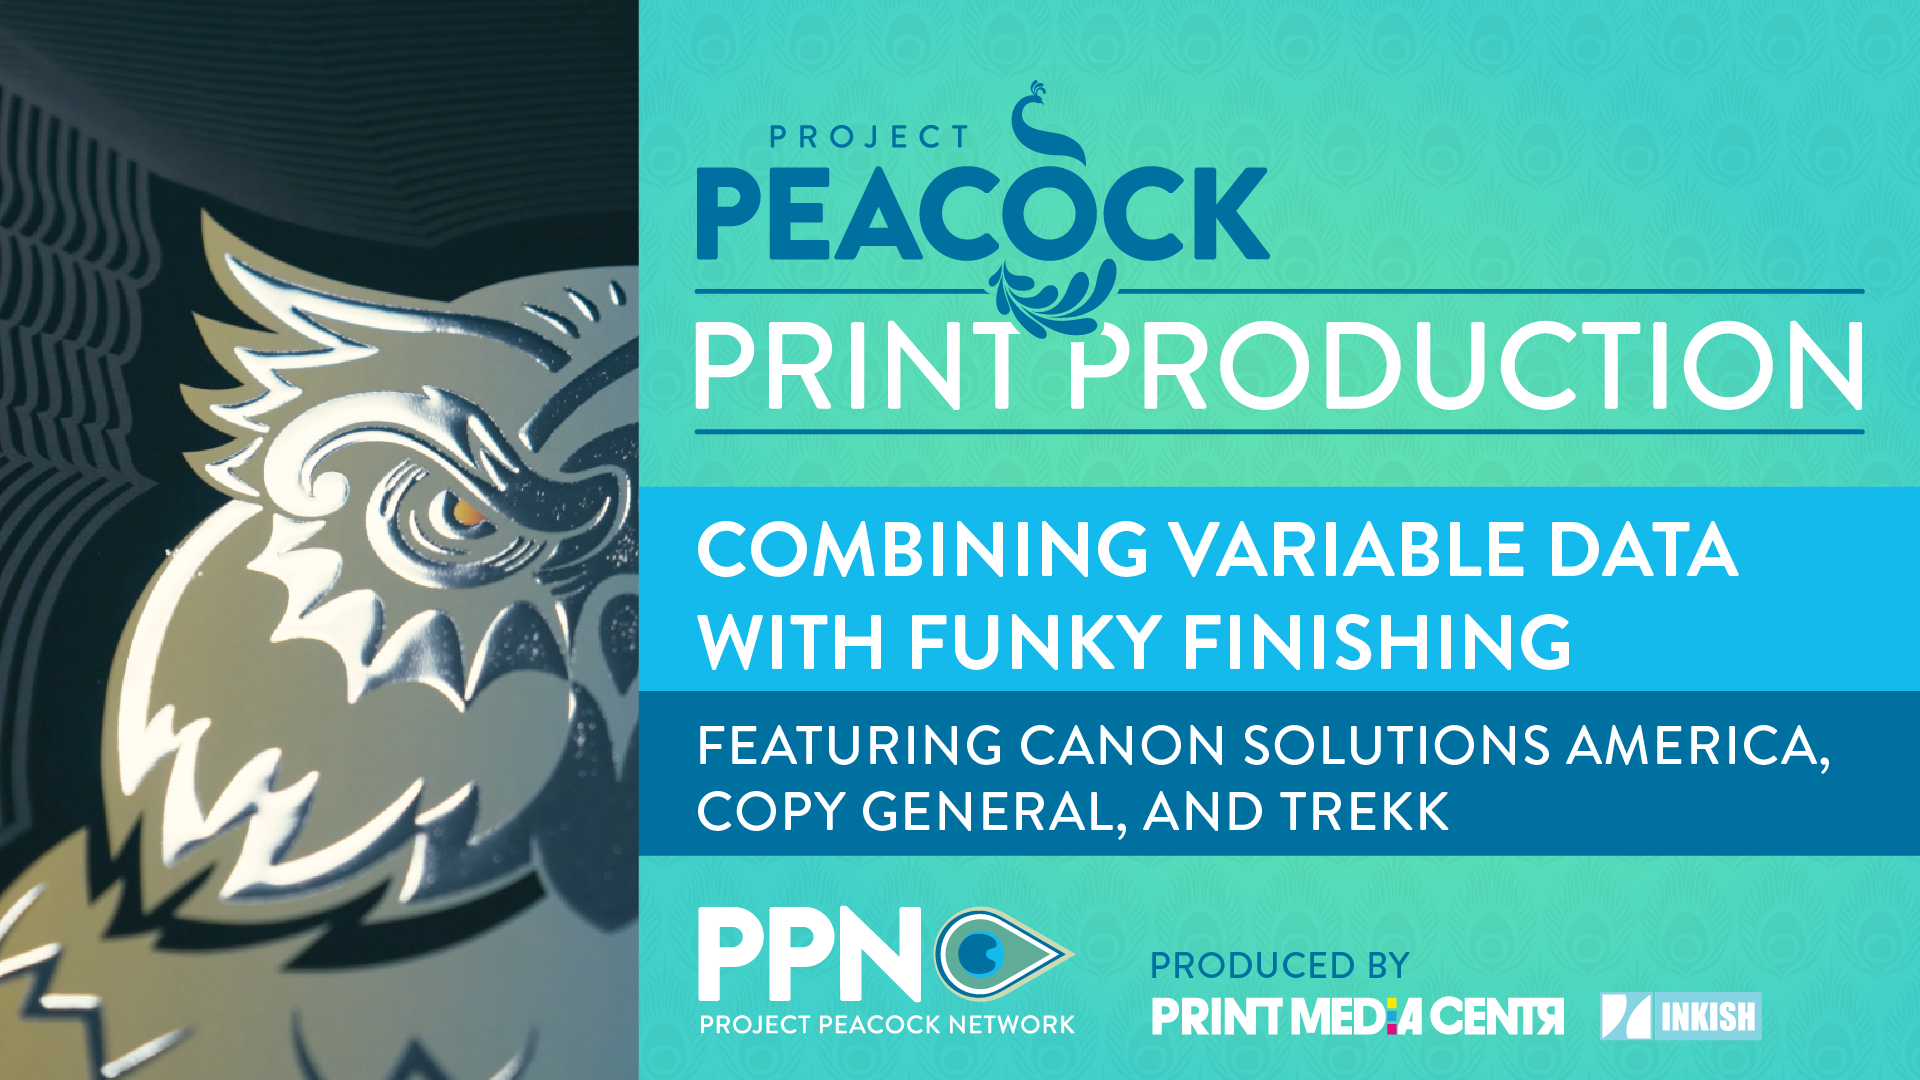 Project Peacock Print Production: Combining Variable Data and Funky Finishing